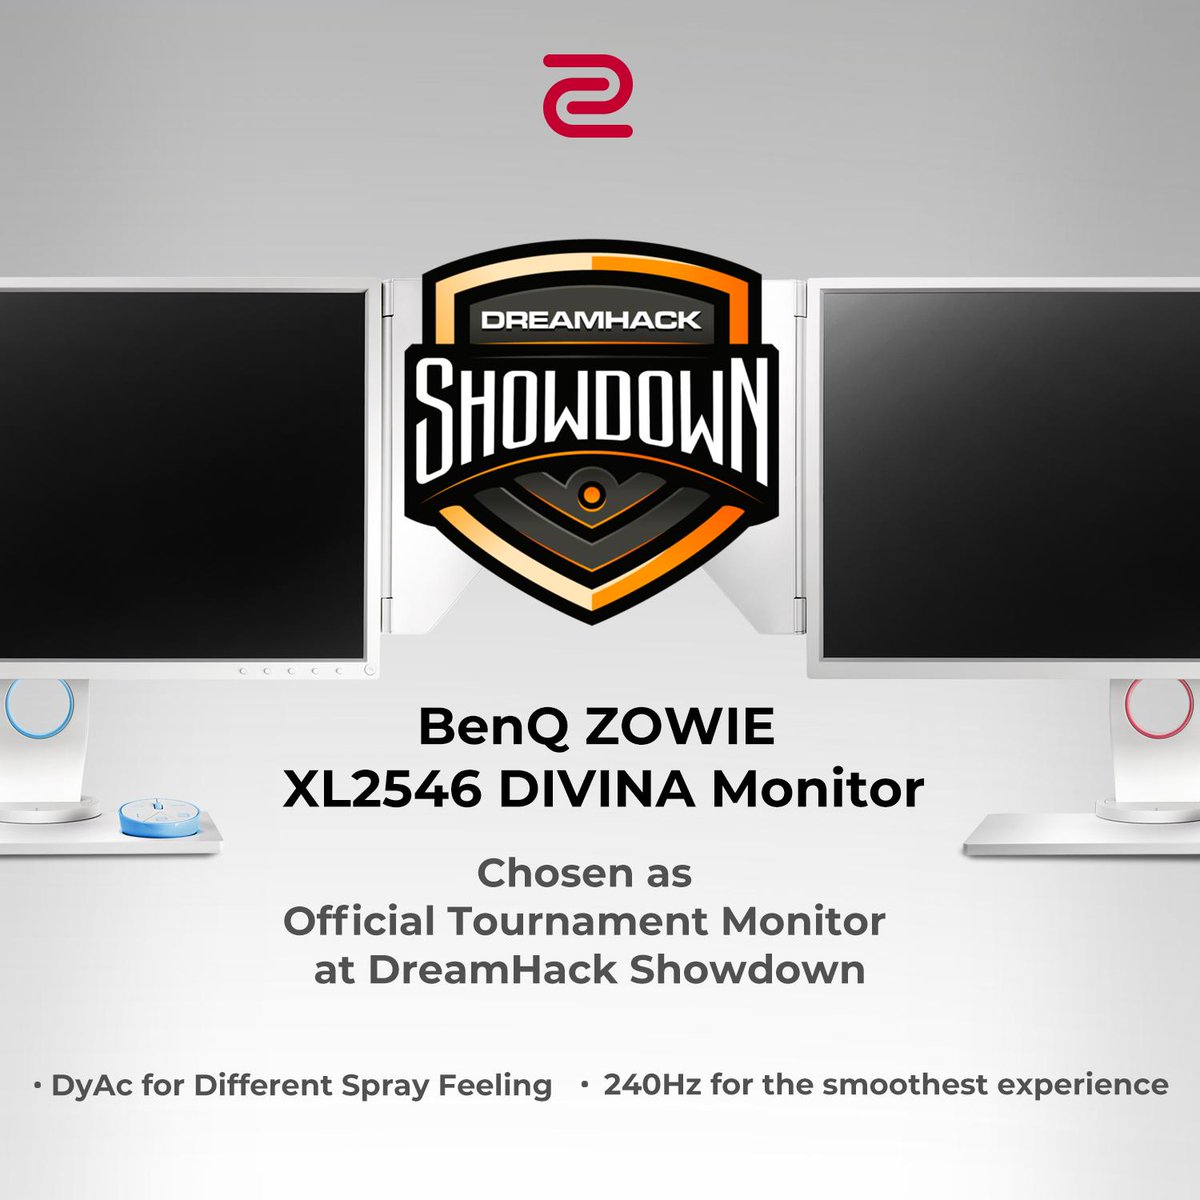 Zowie We Re Happy To Announce Zowie Xl2546 Divina Special Edition Will Be The Official Monitor Of Dreamhack Showdown Xl2546 Features Our Exclusive Dyac Technology Which Provides A Different Spray Feeling